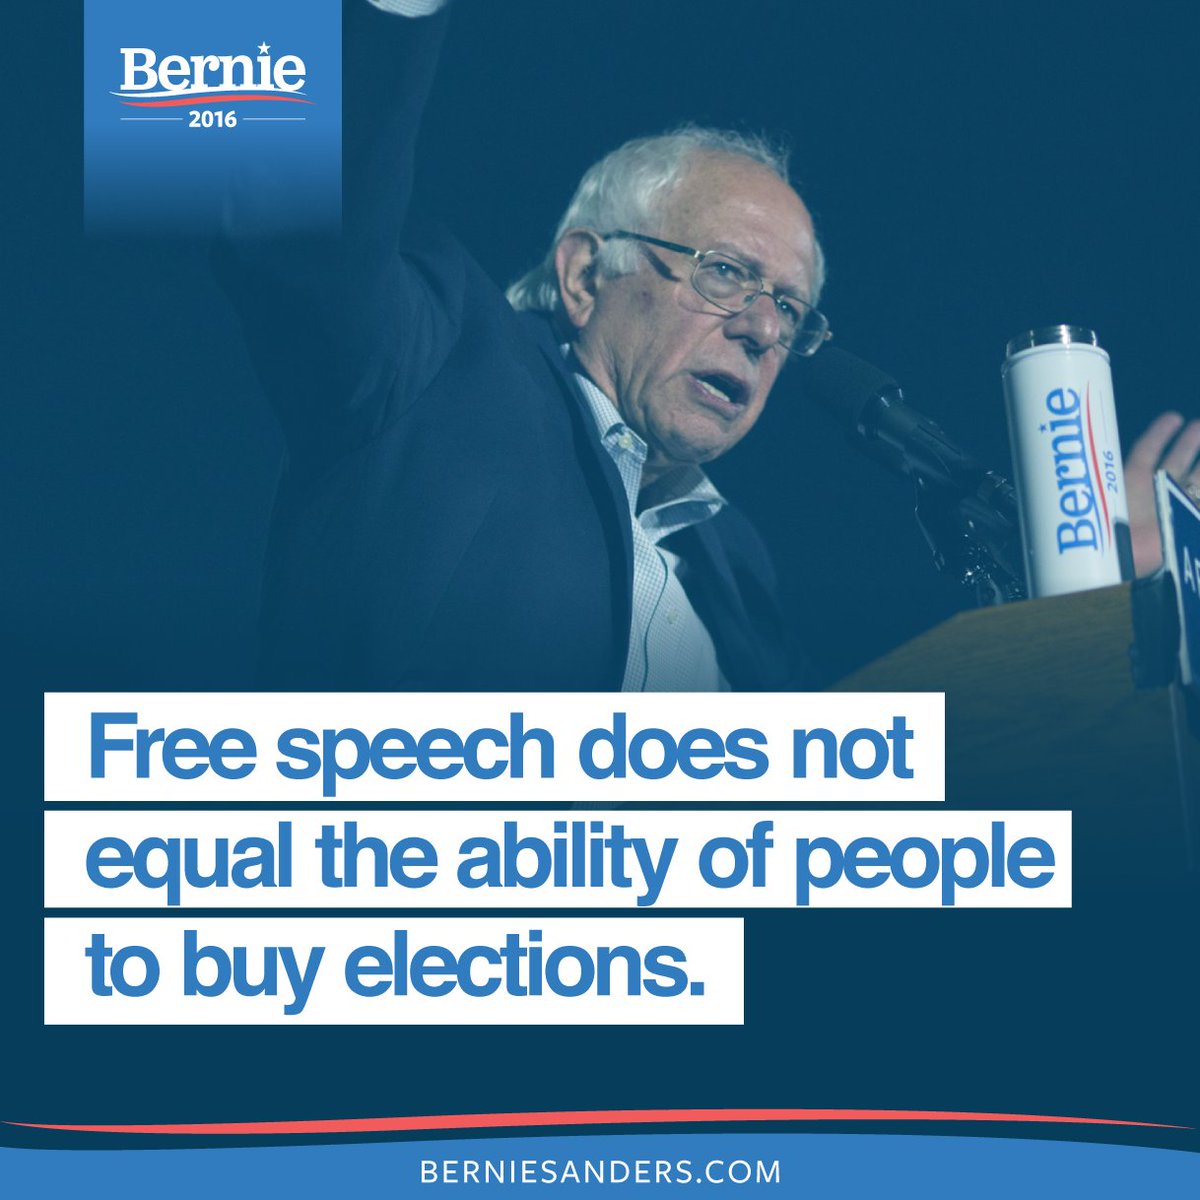 RT @BernieSanders: Elections should not be auctions. In a democracy, we should have the right to elect people based on their ideas. https:/…